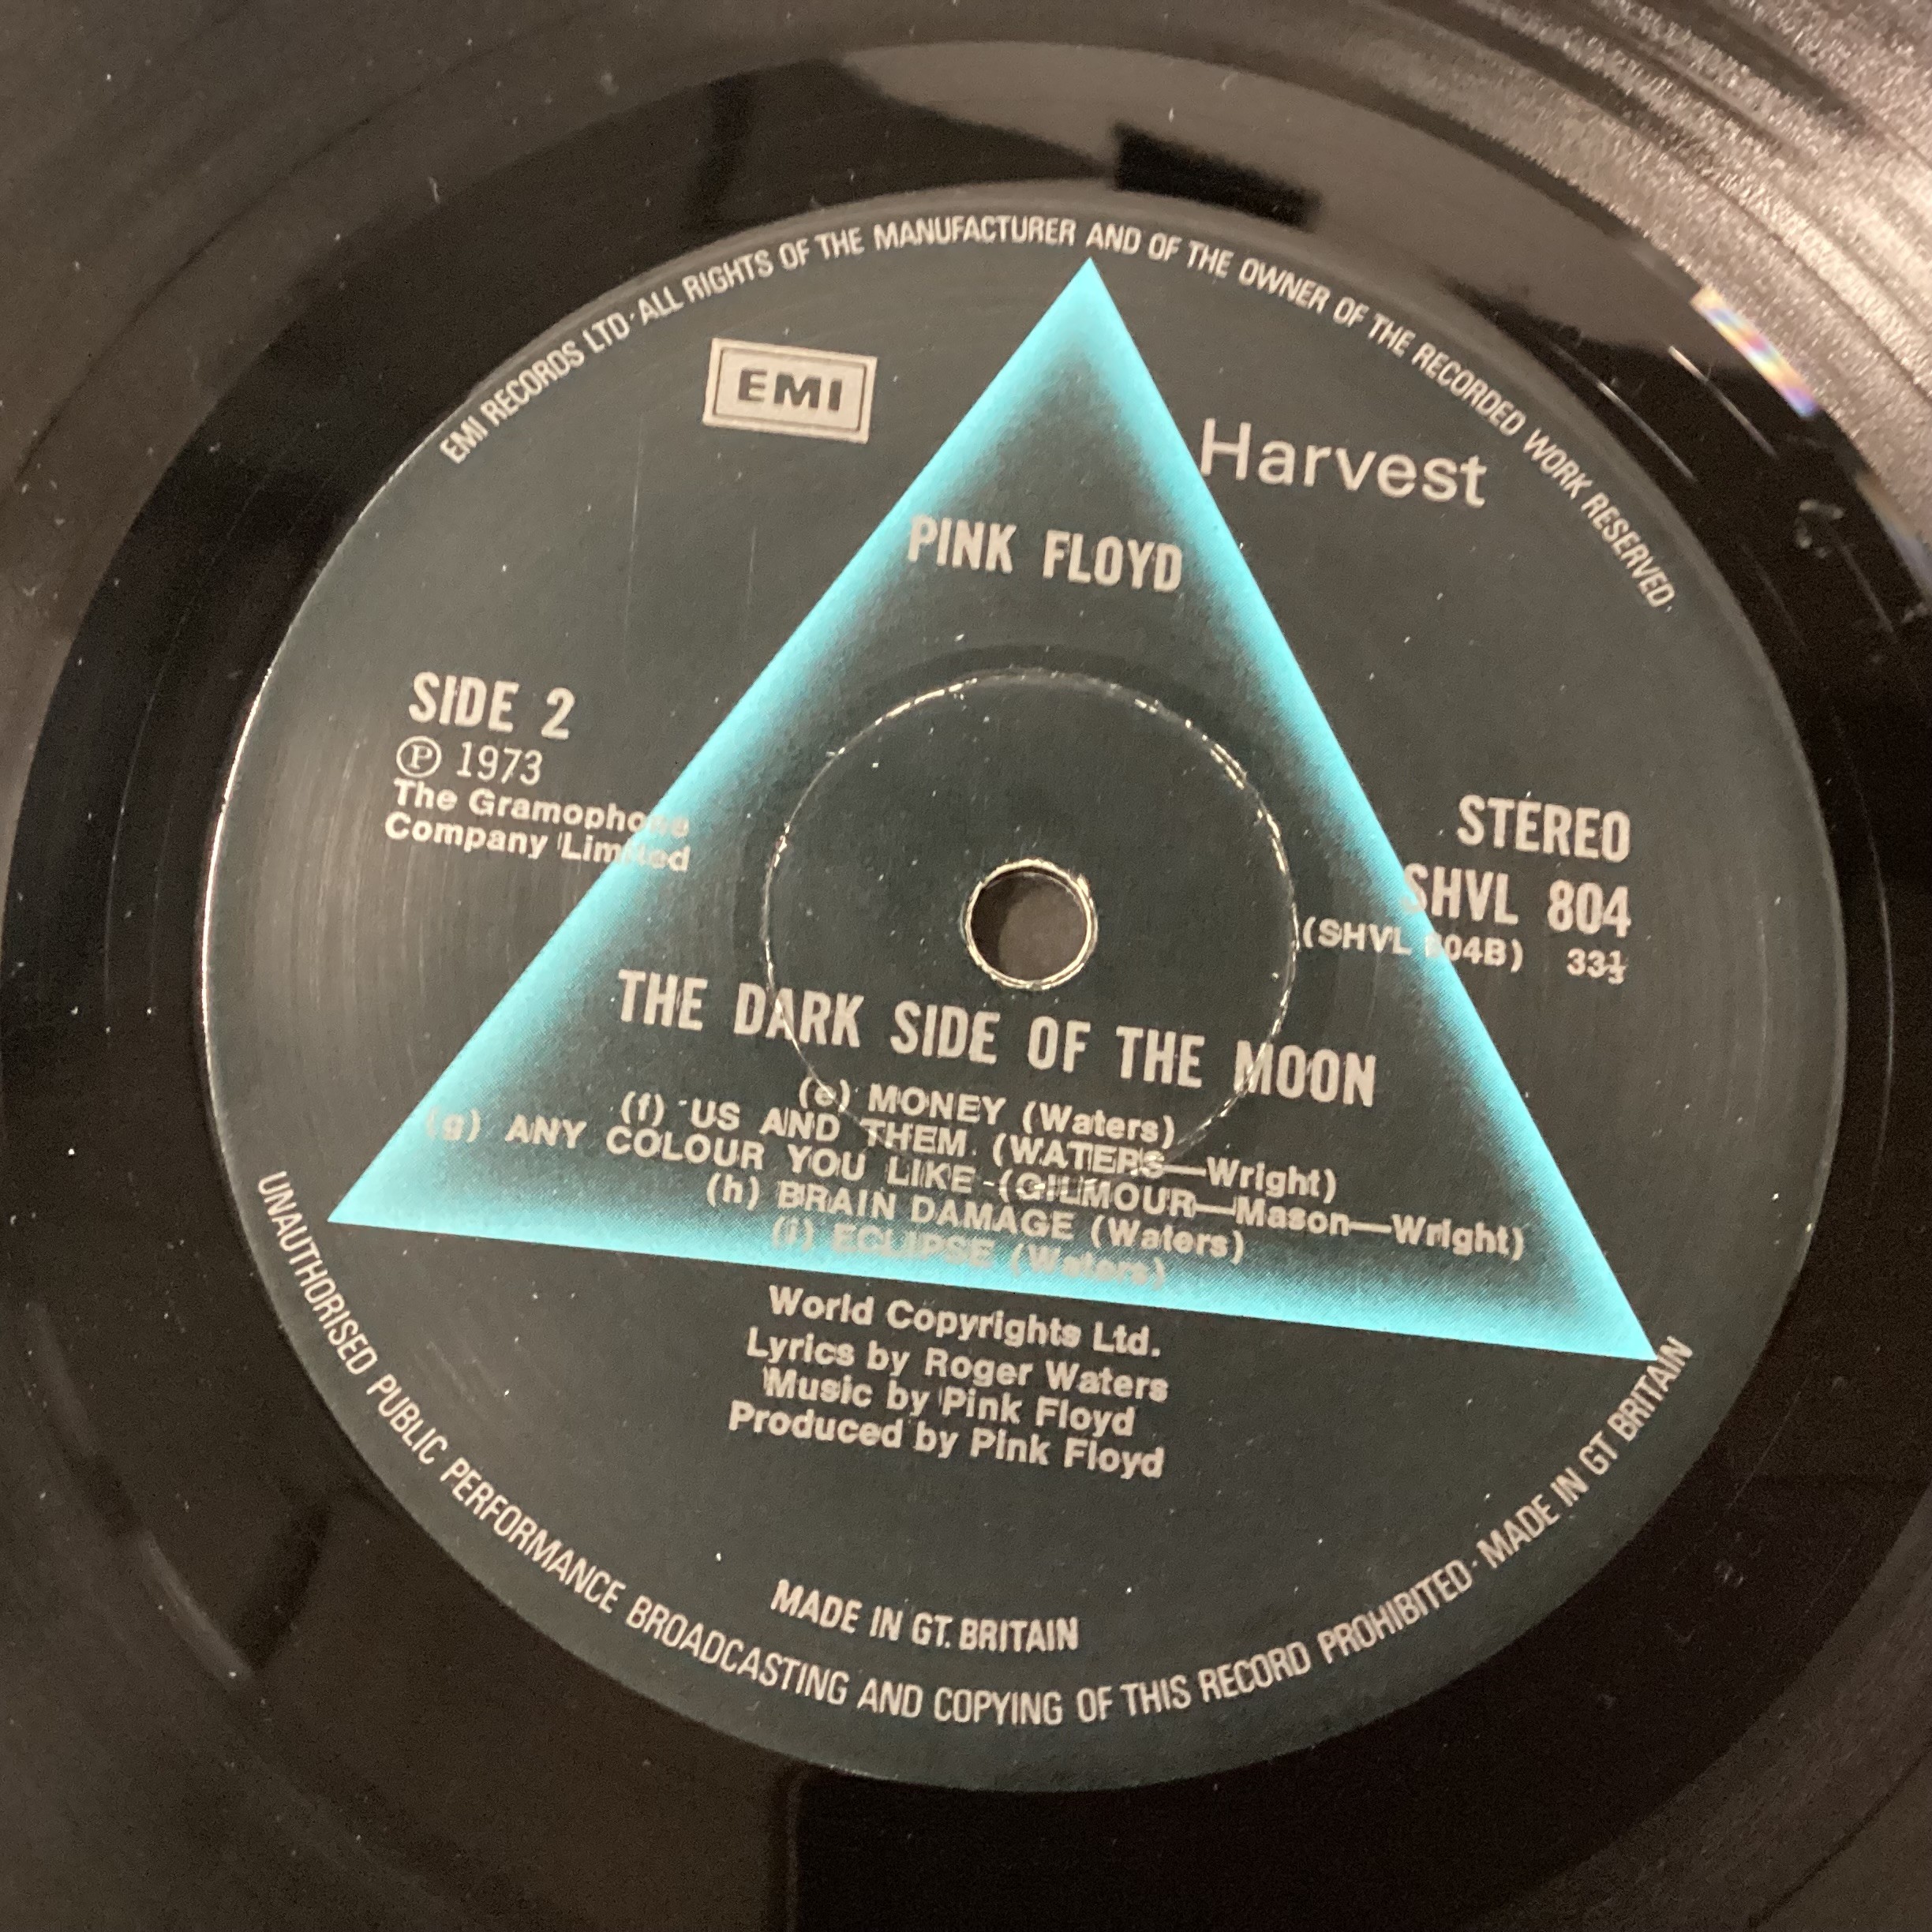 PINK FLOYD VINYL ALBUM ‘DARK SIDE OF THE MOON’. This is on Harvest SHVL 804 from 1973 with A3/B3 - Image 3 of 4